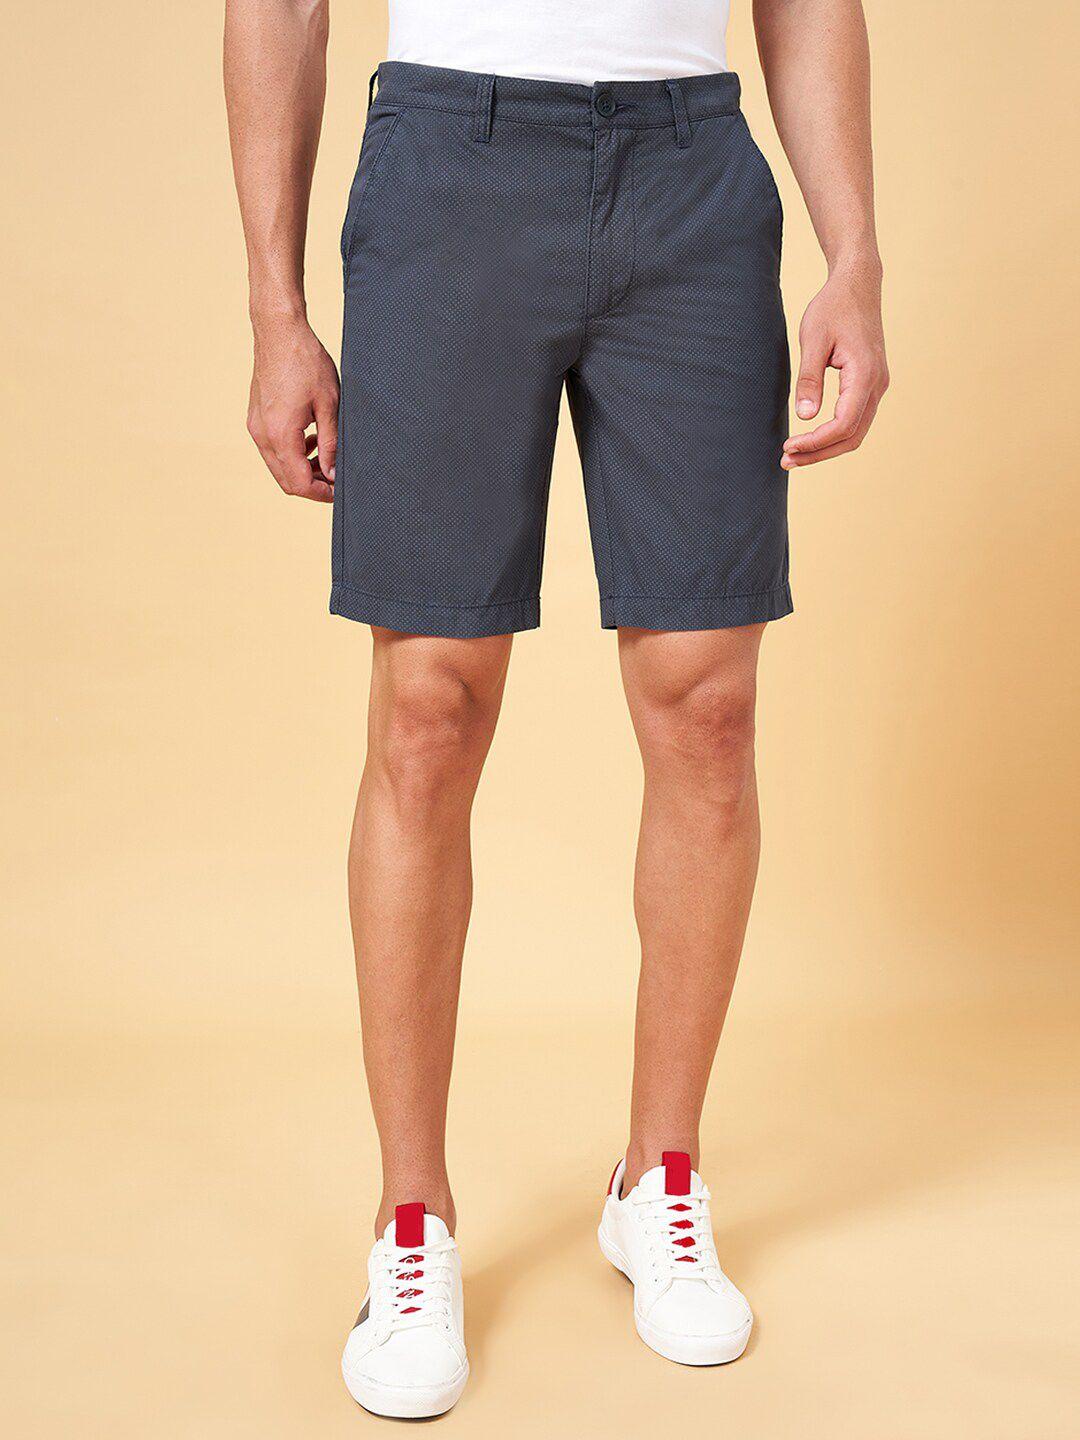 byford-by-pantaloons-men-printed-mid-rise-slim-fit-cotton-shorts